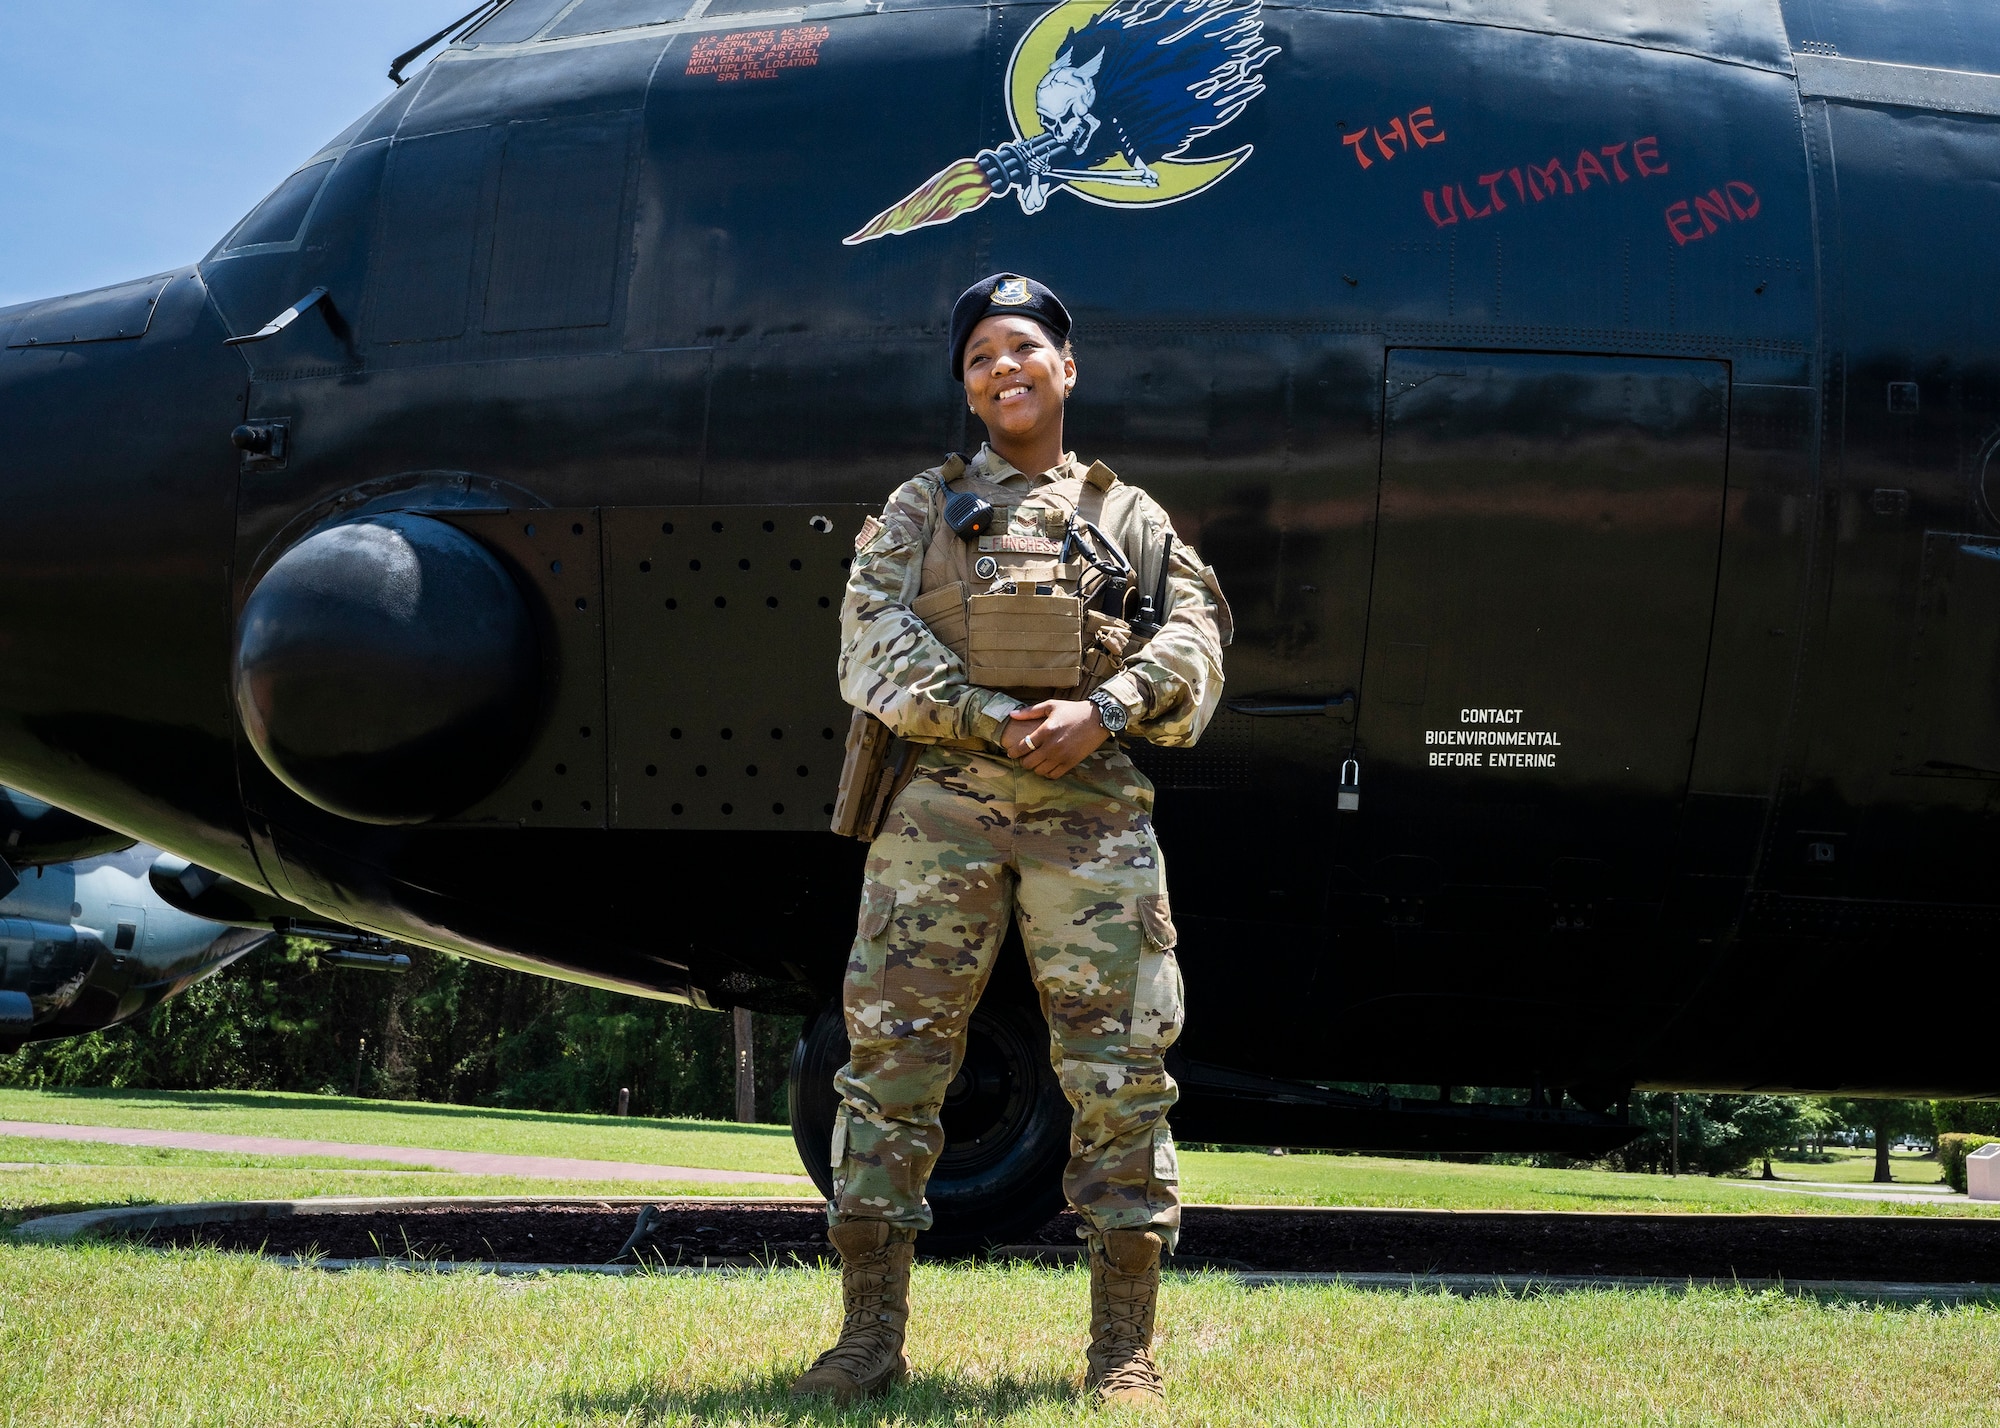 Photo of Airman standing in front of an AC-130